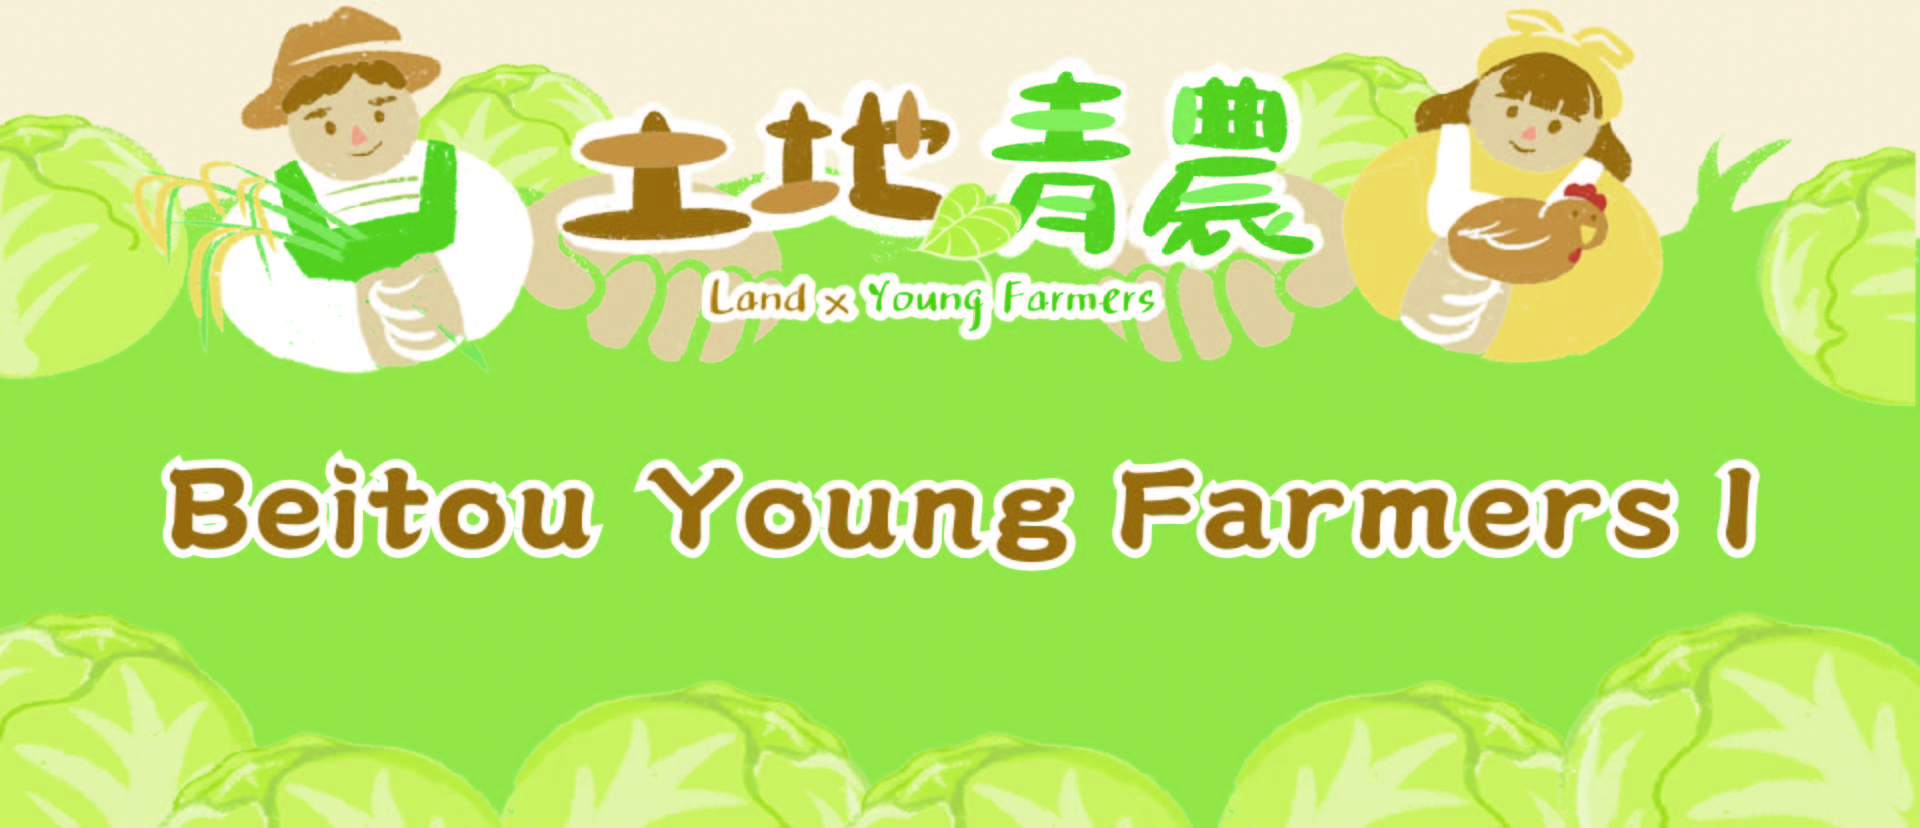 Beitou Young Farmers I